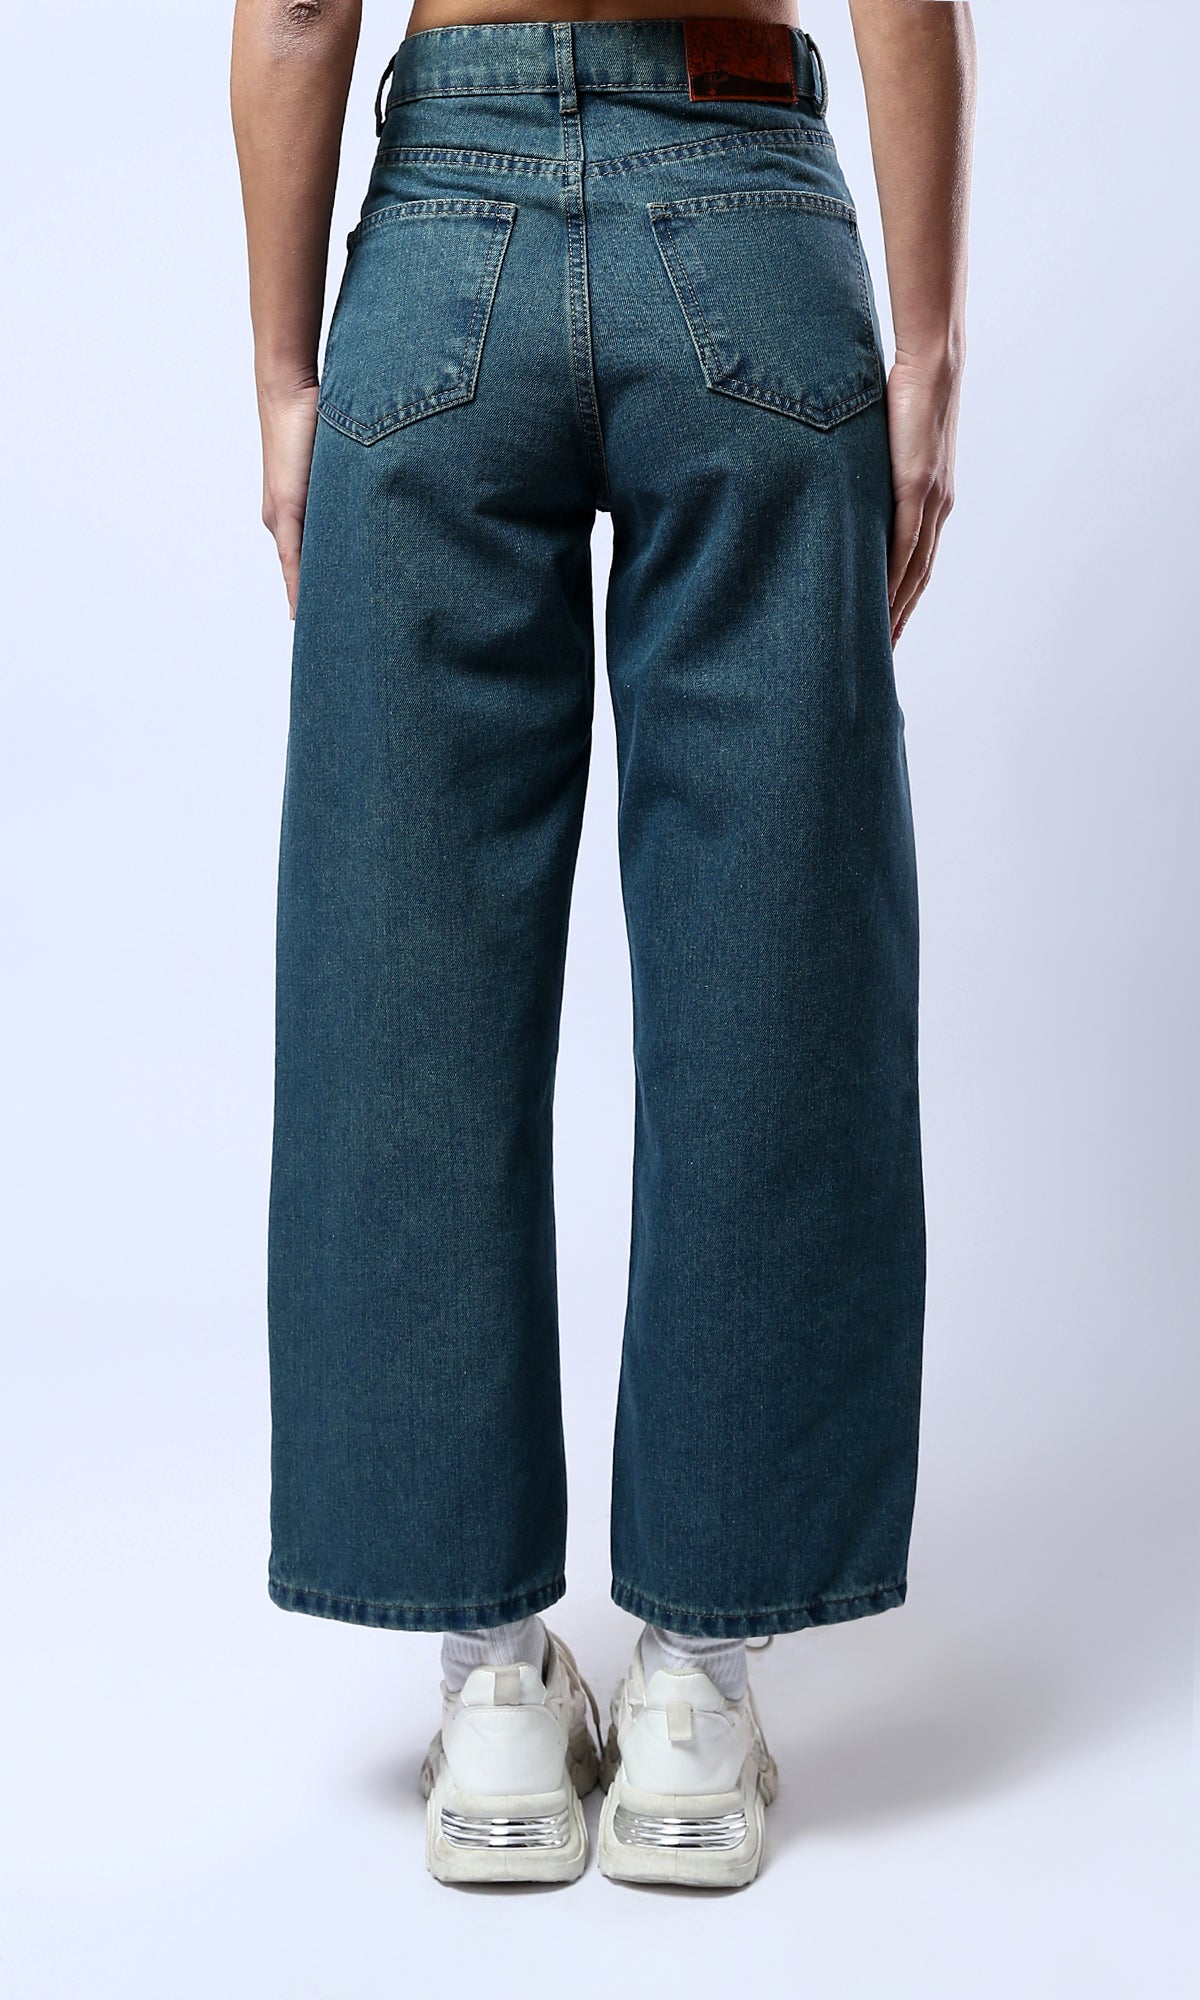 O177957 Greenish Blue Cotton Jeans With Double Closure